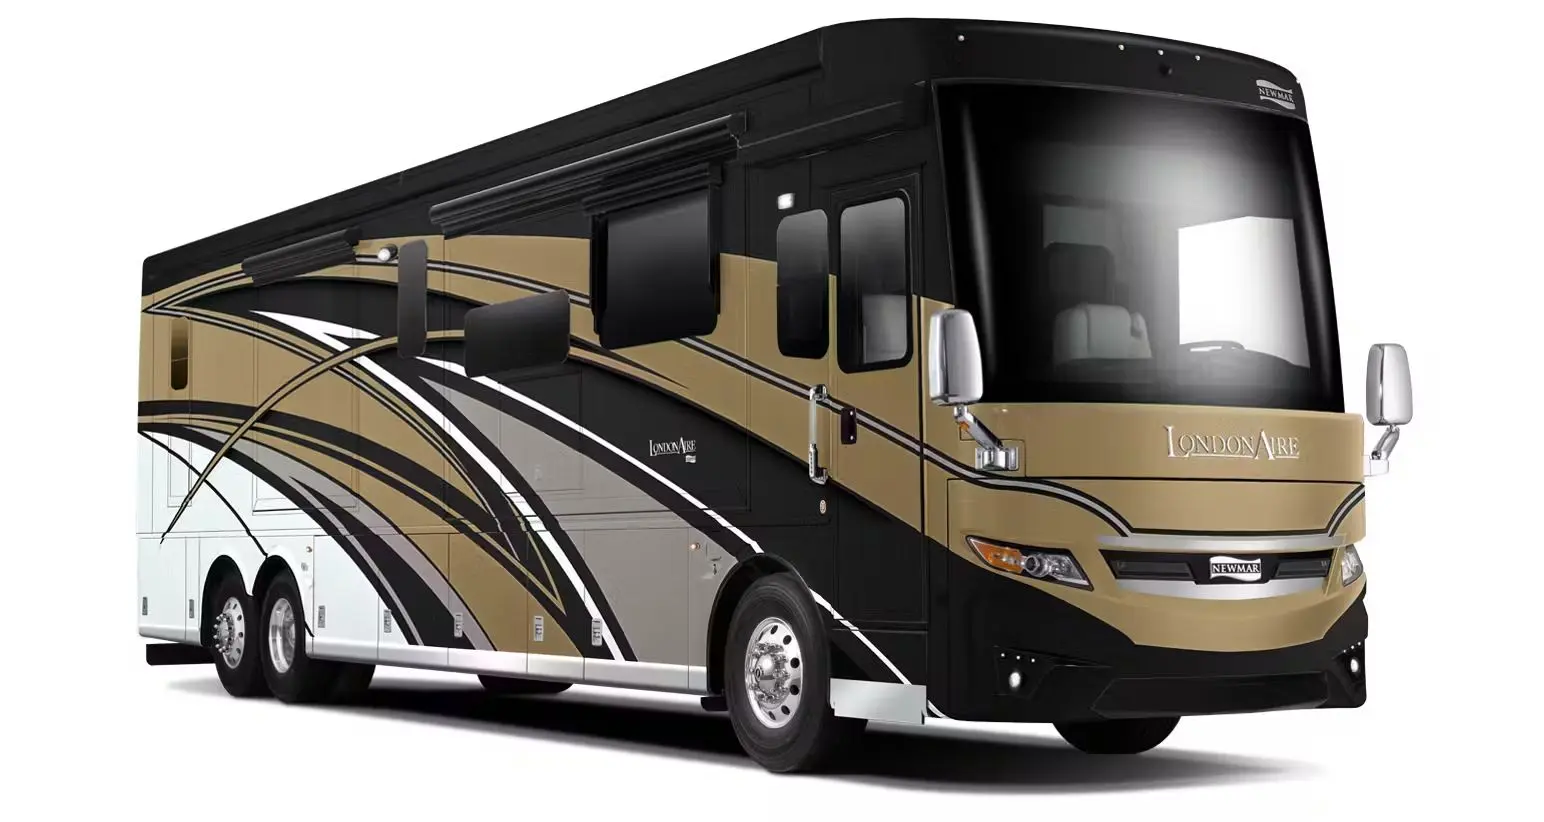 London Aire Class A Motor Home